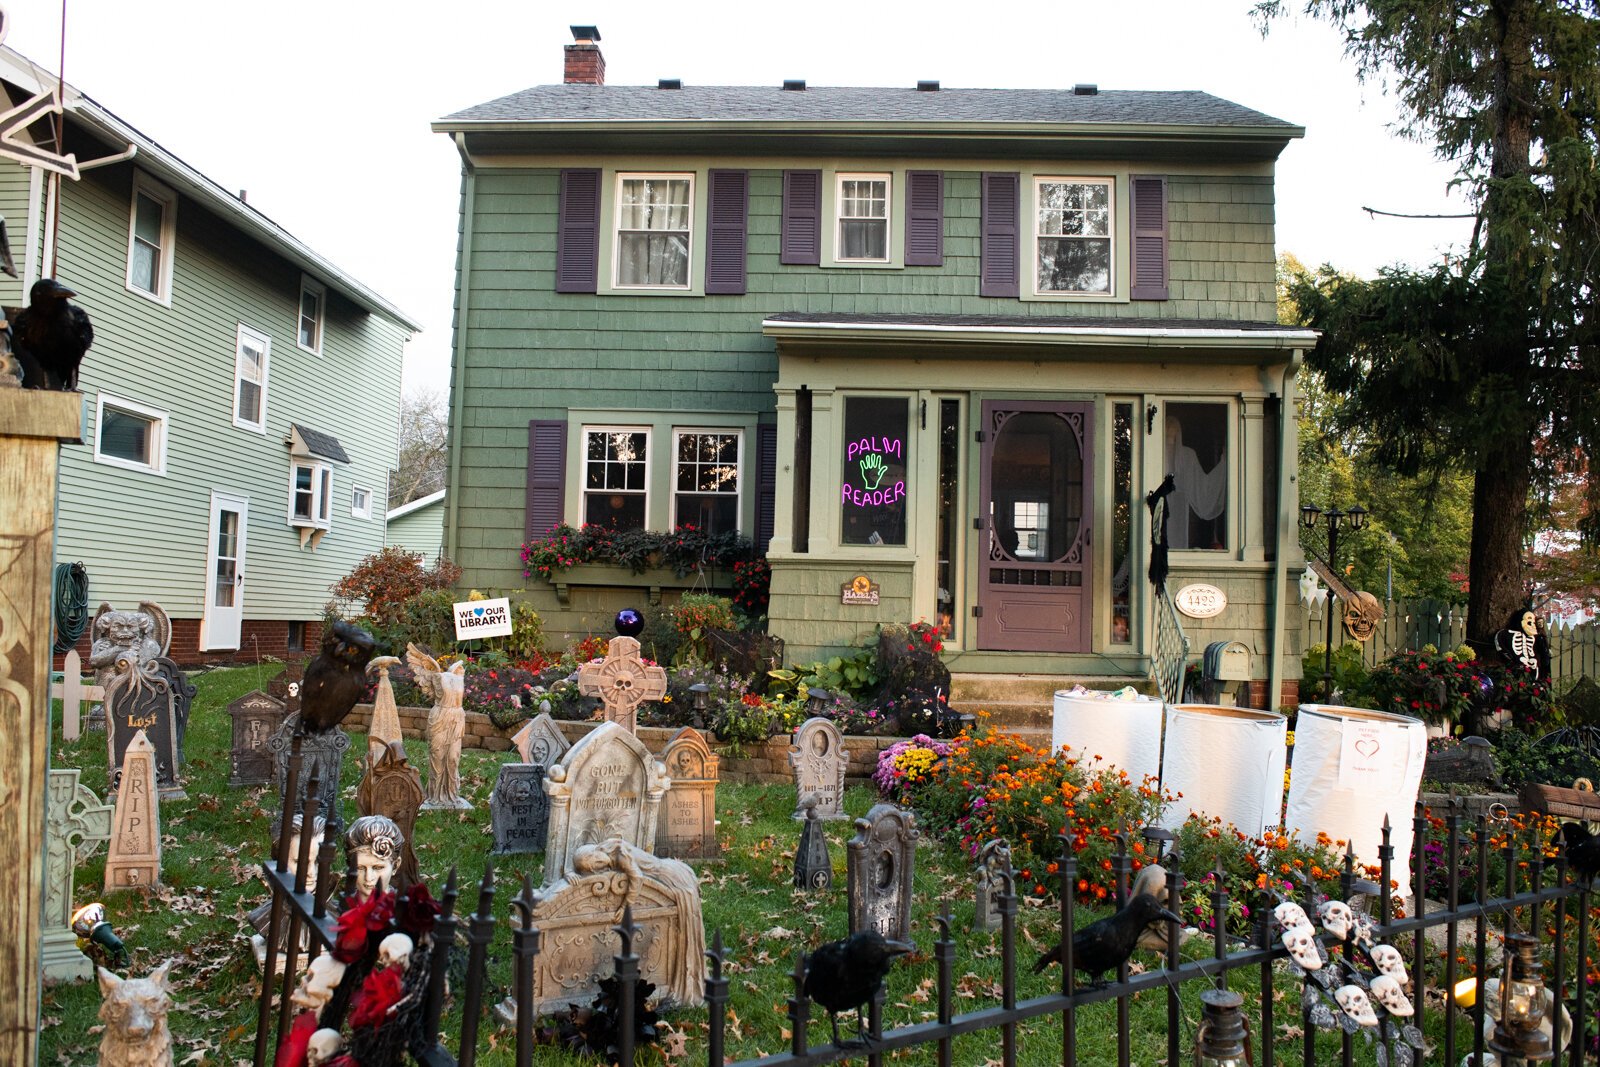 Halloween decor at 4429 Indiana Ave. in Fort Wayne.